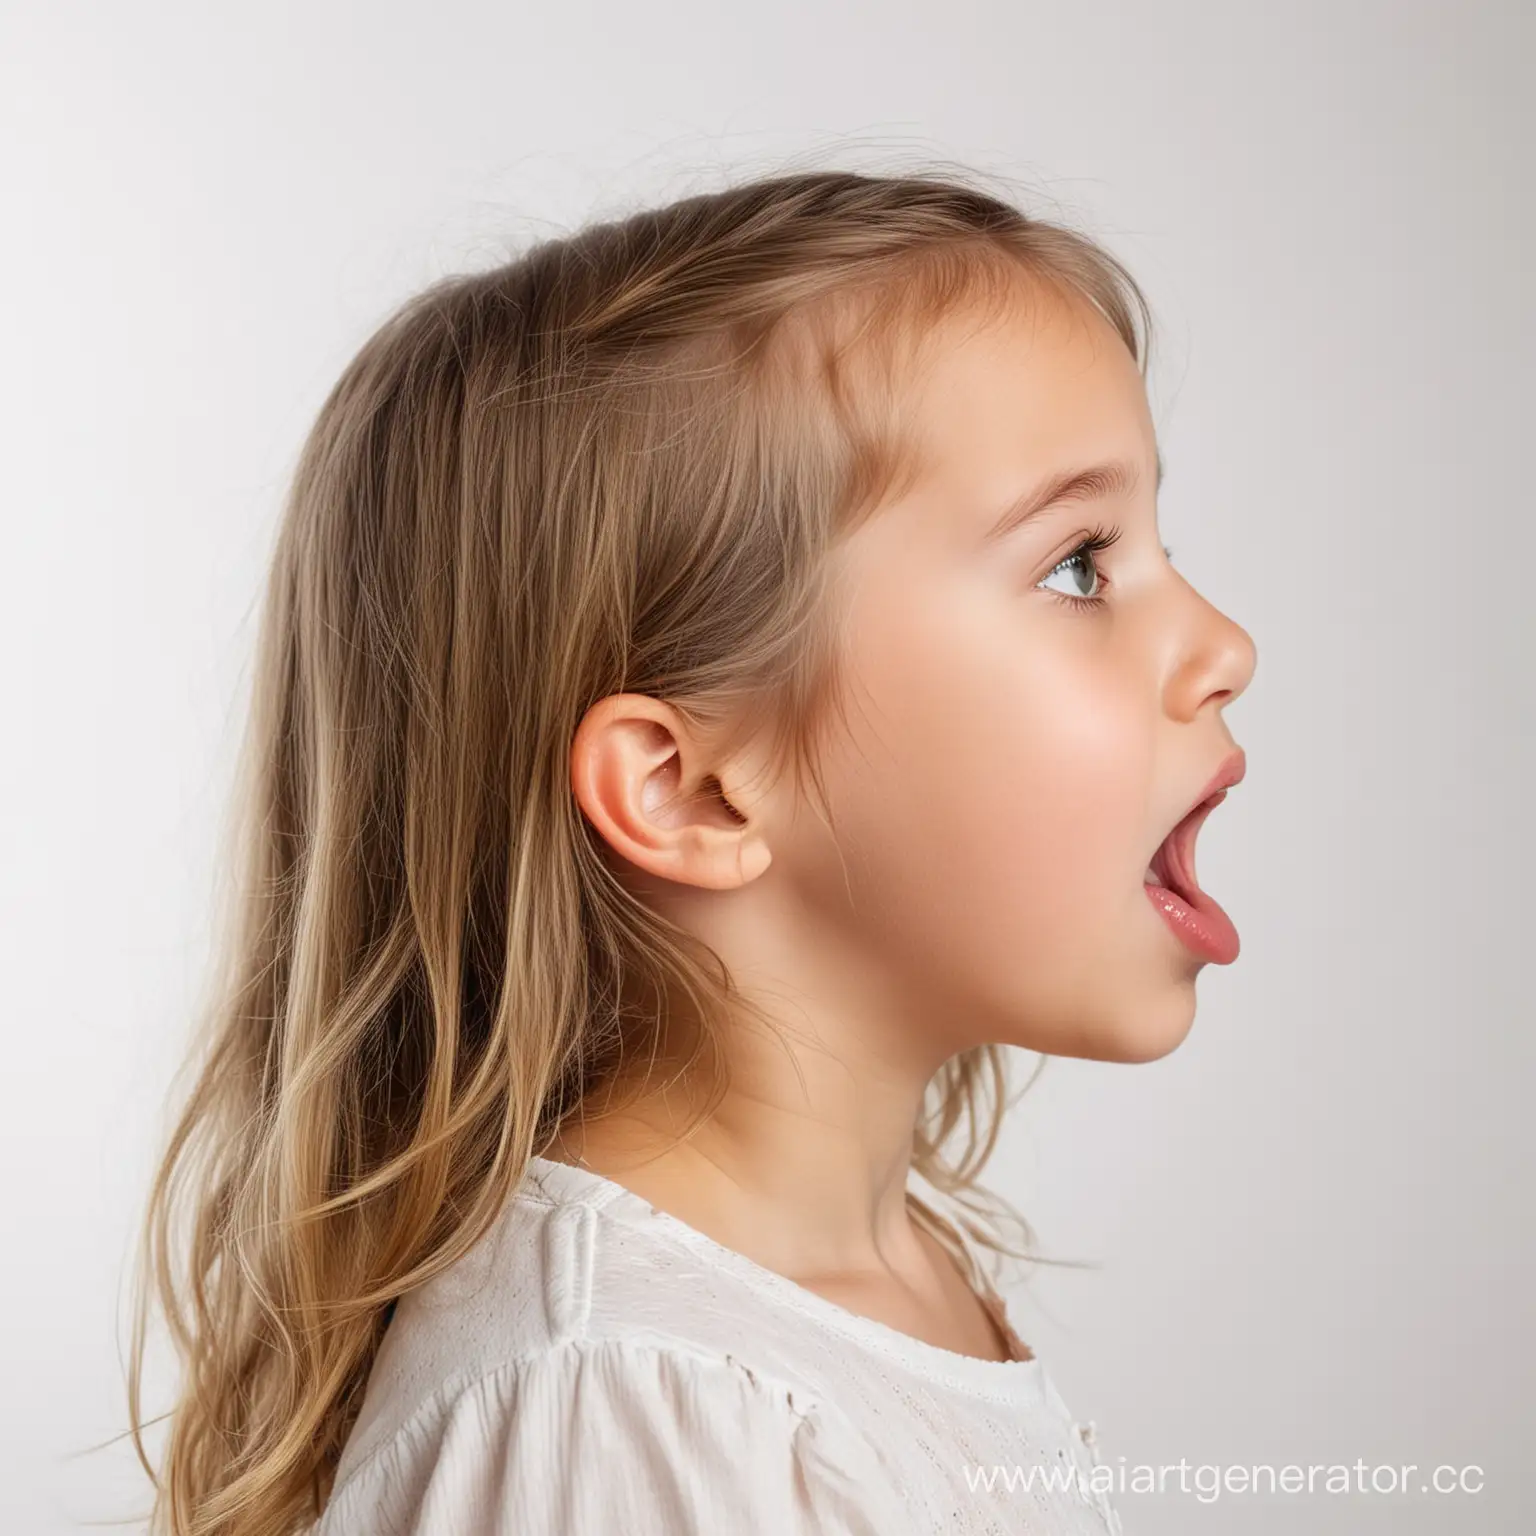 A little girl seen in profile and opening her mouth, white background.